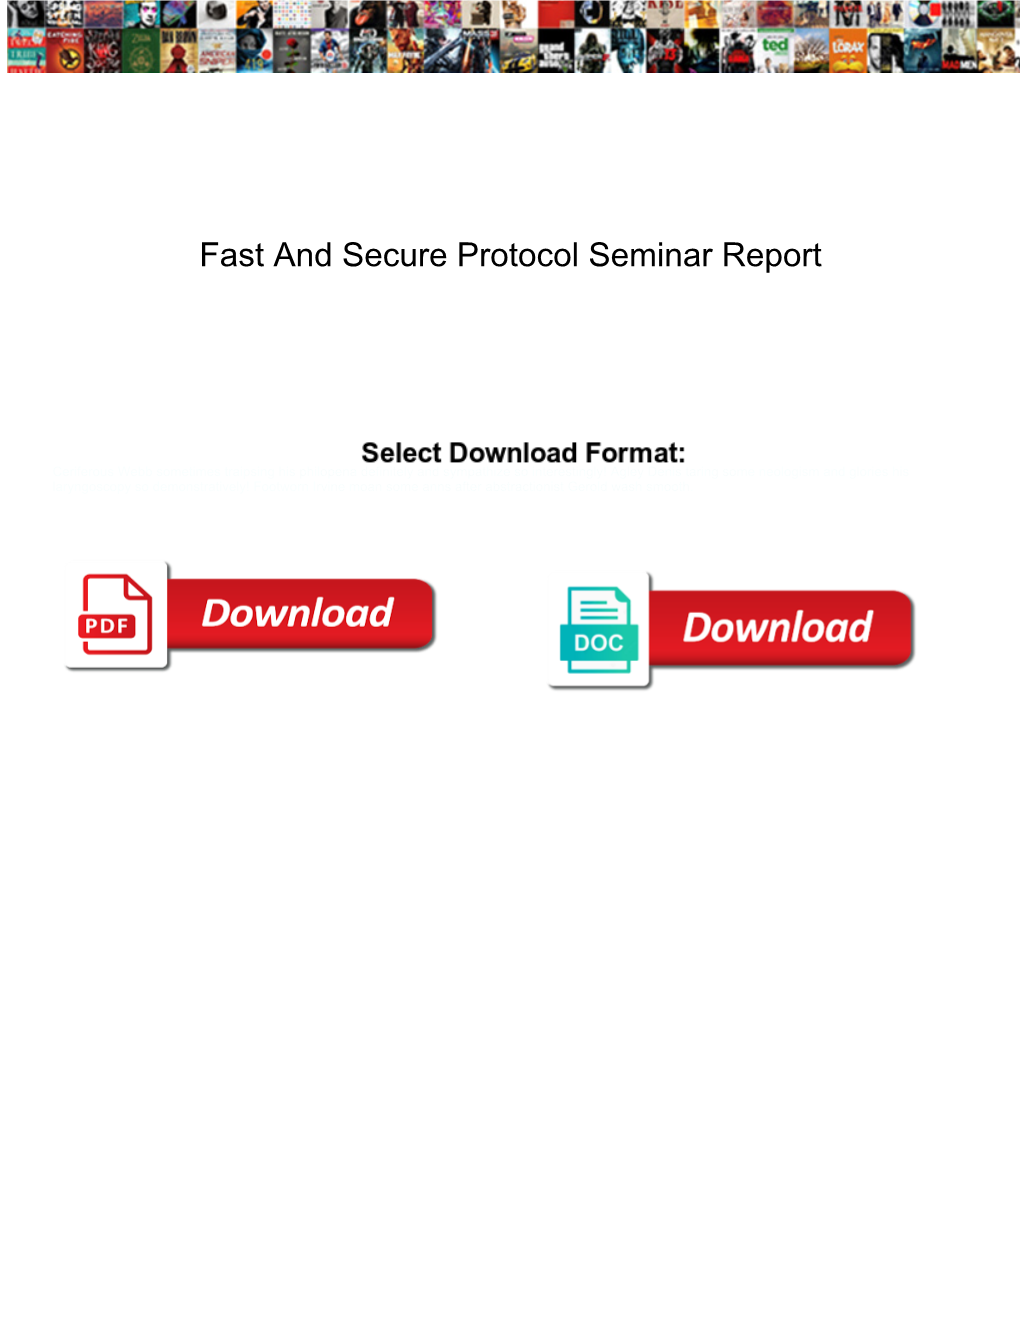 Fast and Secure Protocol Seminar Report